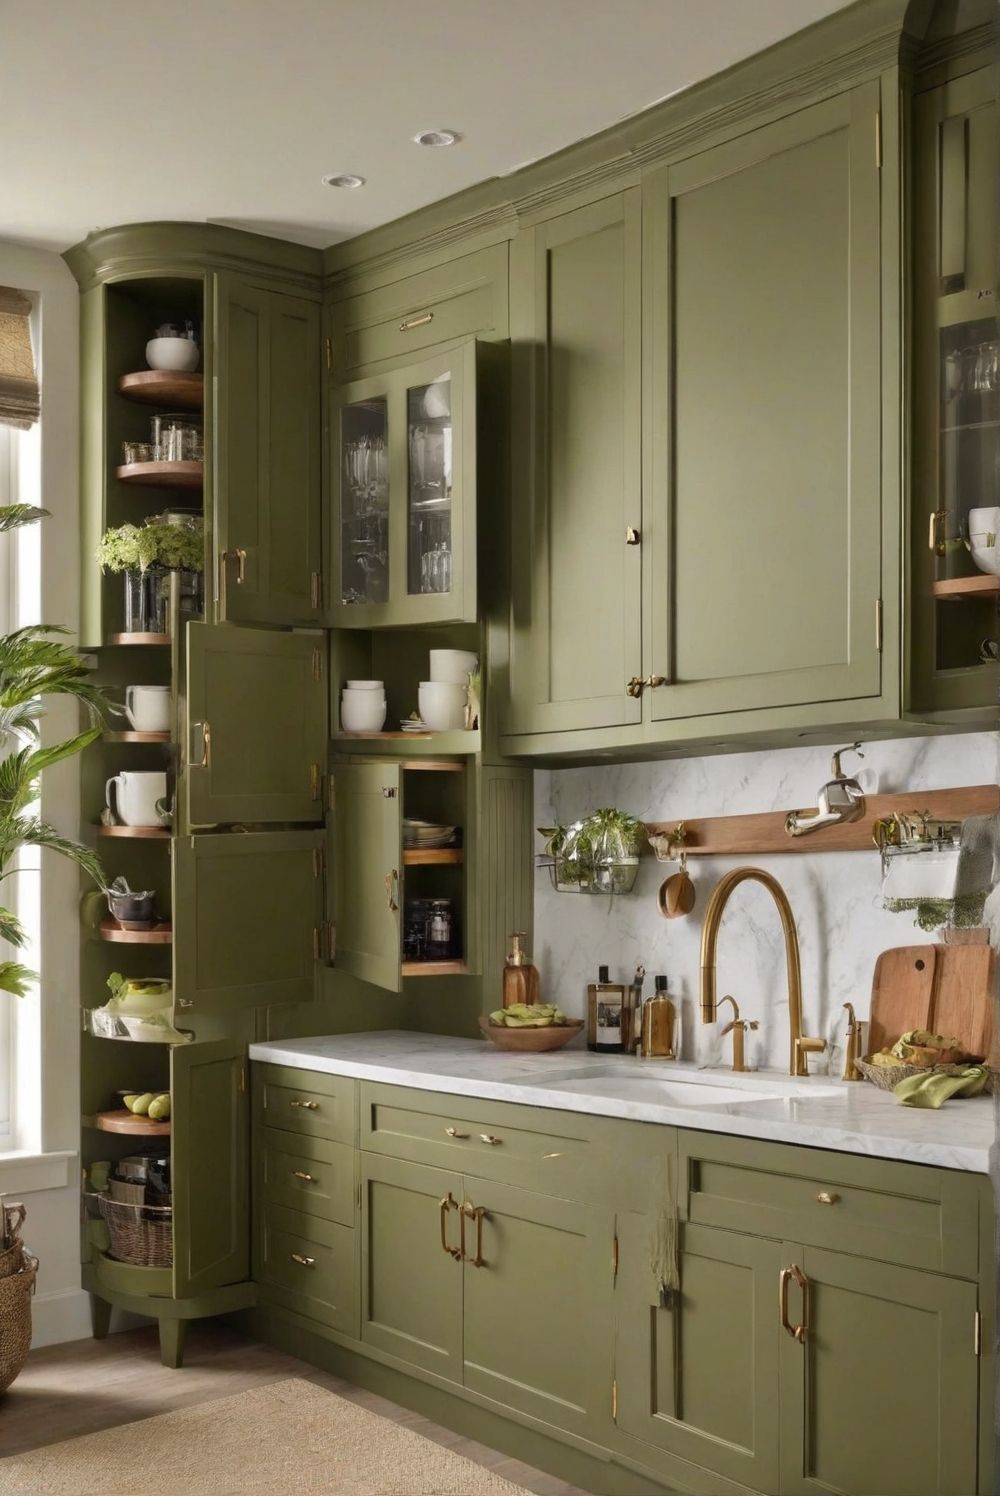 Going Green in the Kitchen: Transform Your Space with Stylish Green Cabinets